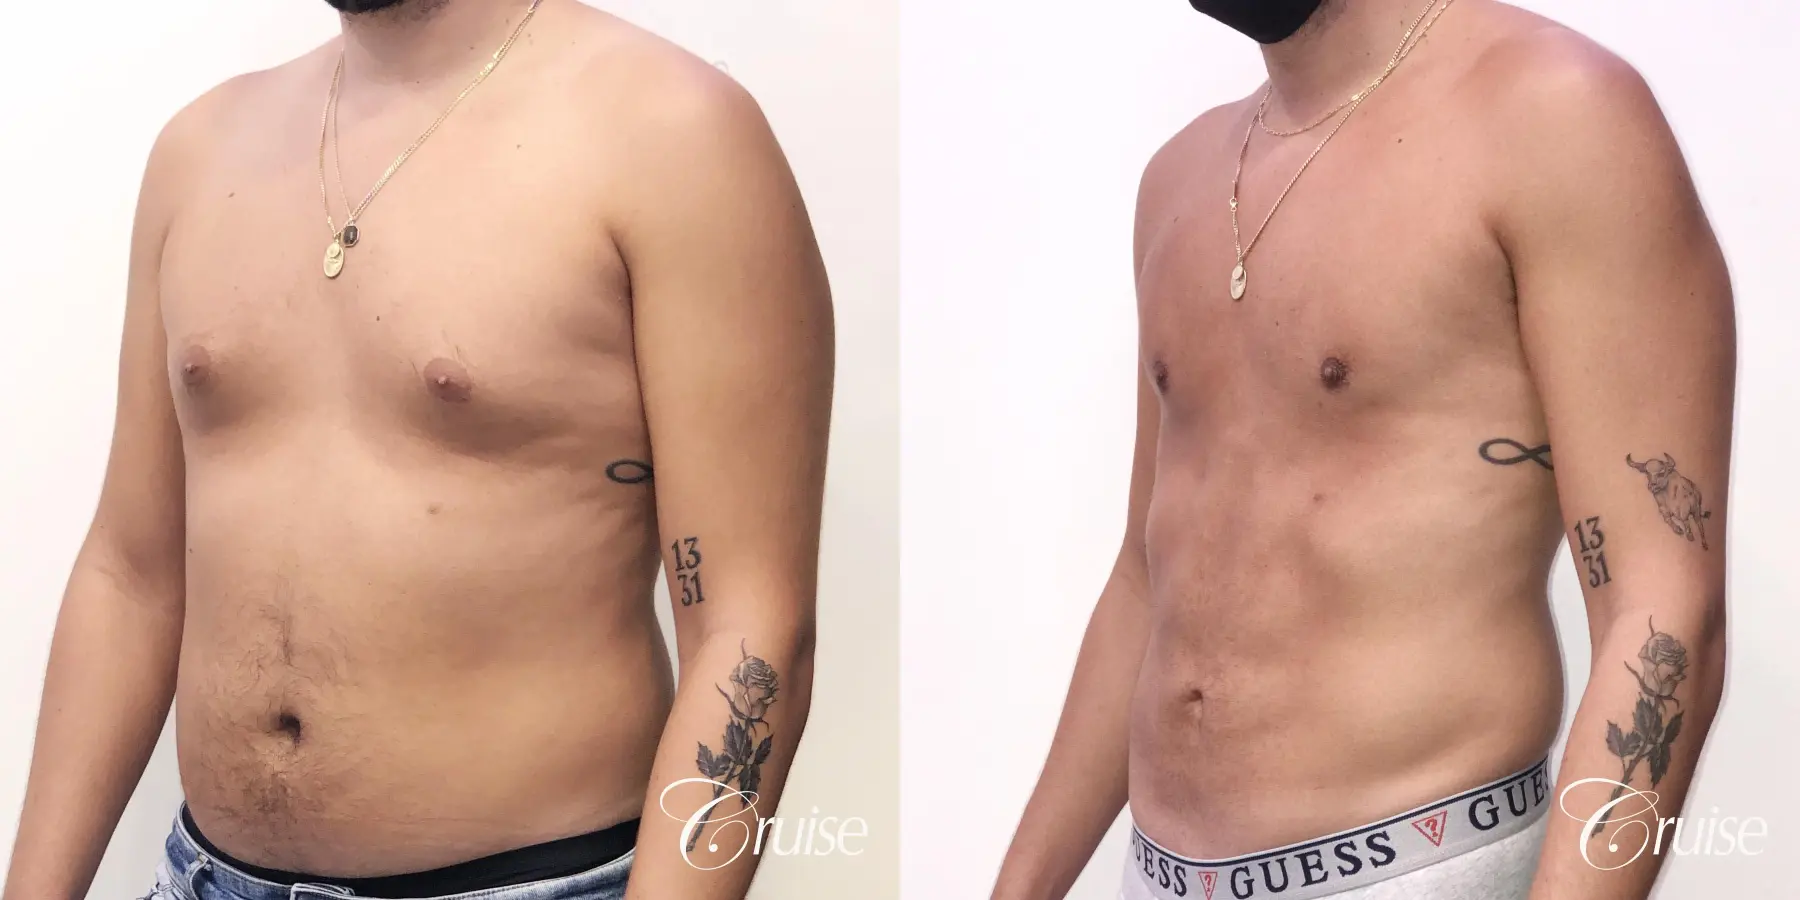 gynecomastia correction orange county - Before and After 3